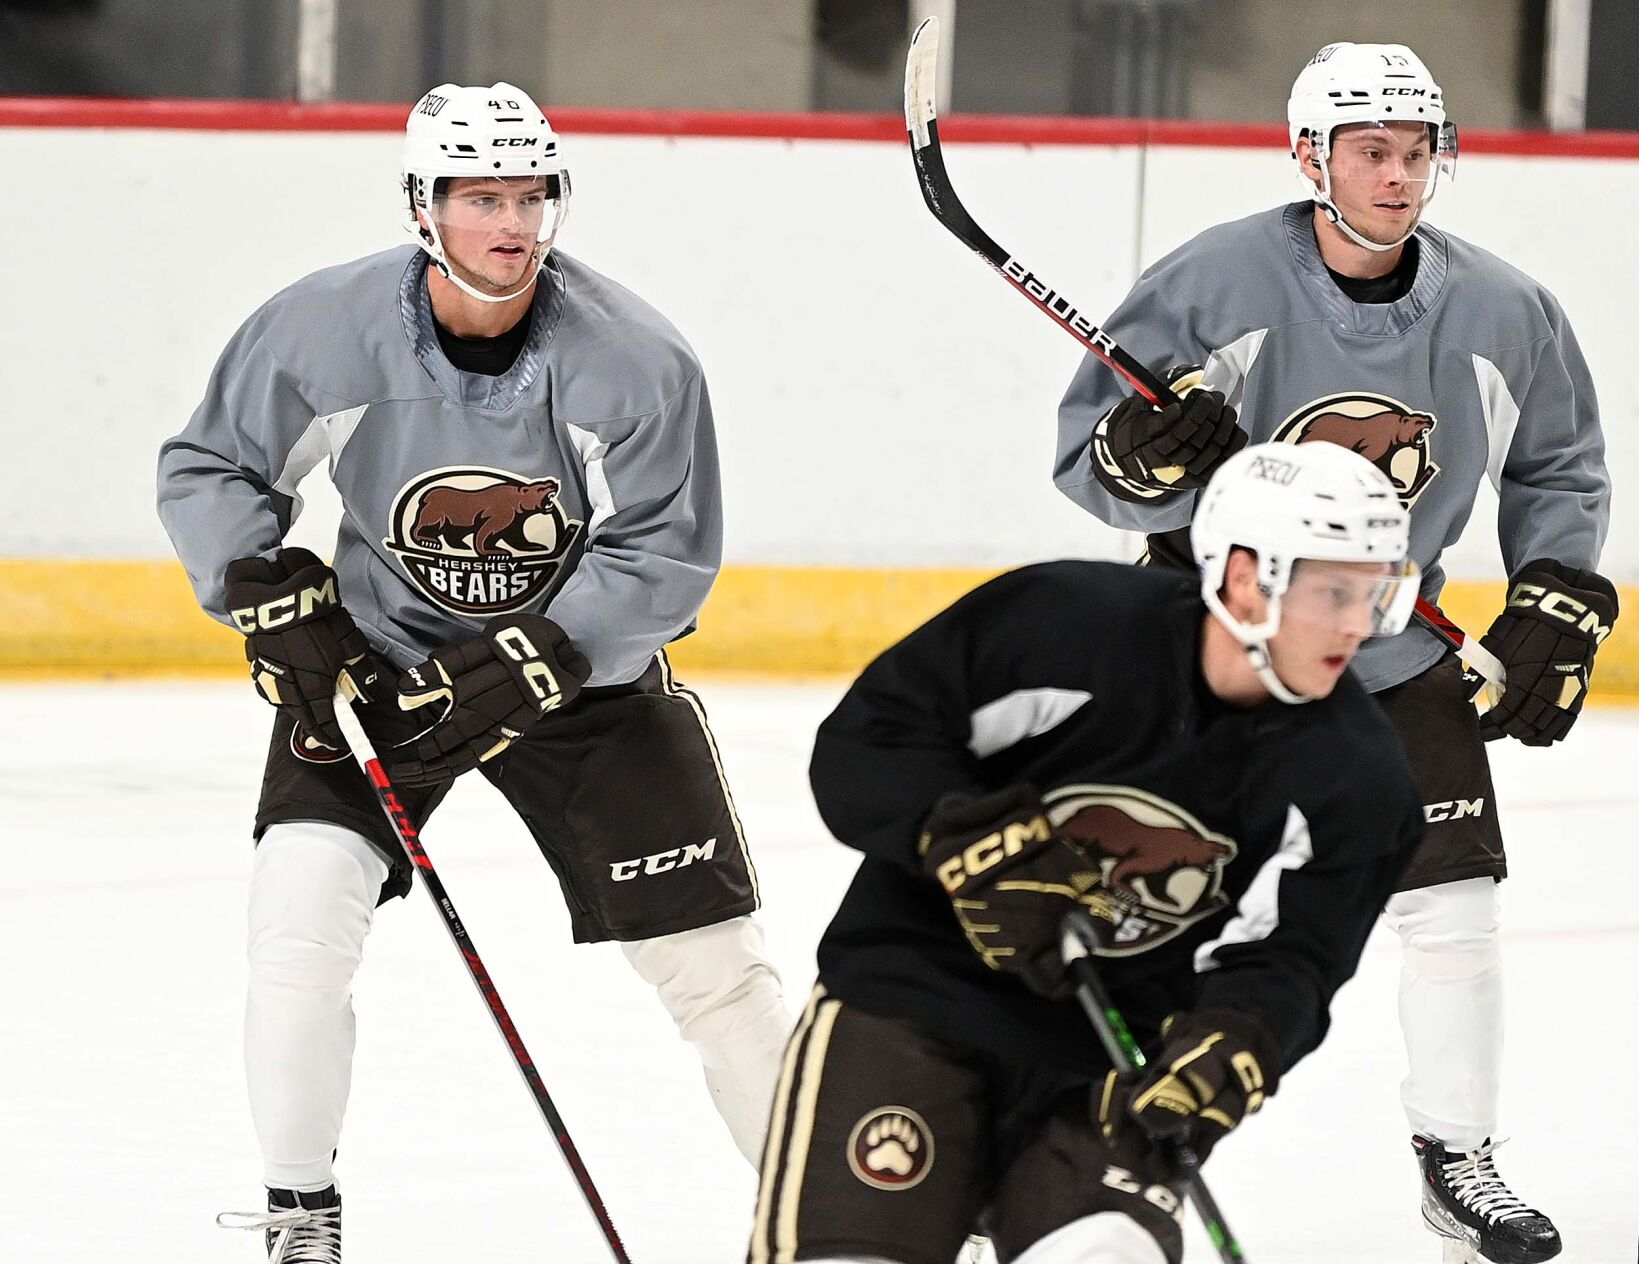 Hershey Bears rally in Rochester, take 3-1 series lead in Eastern Conference Finals